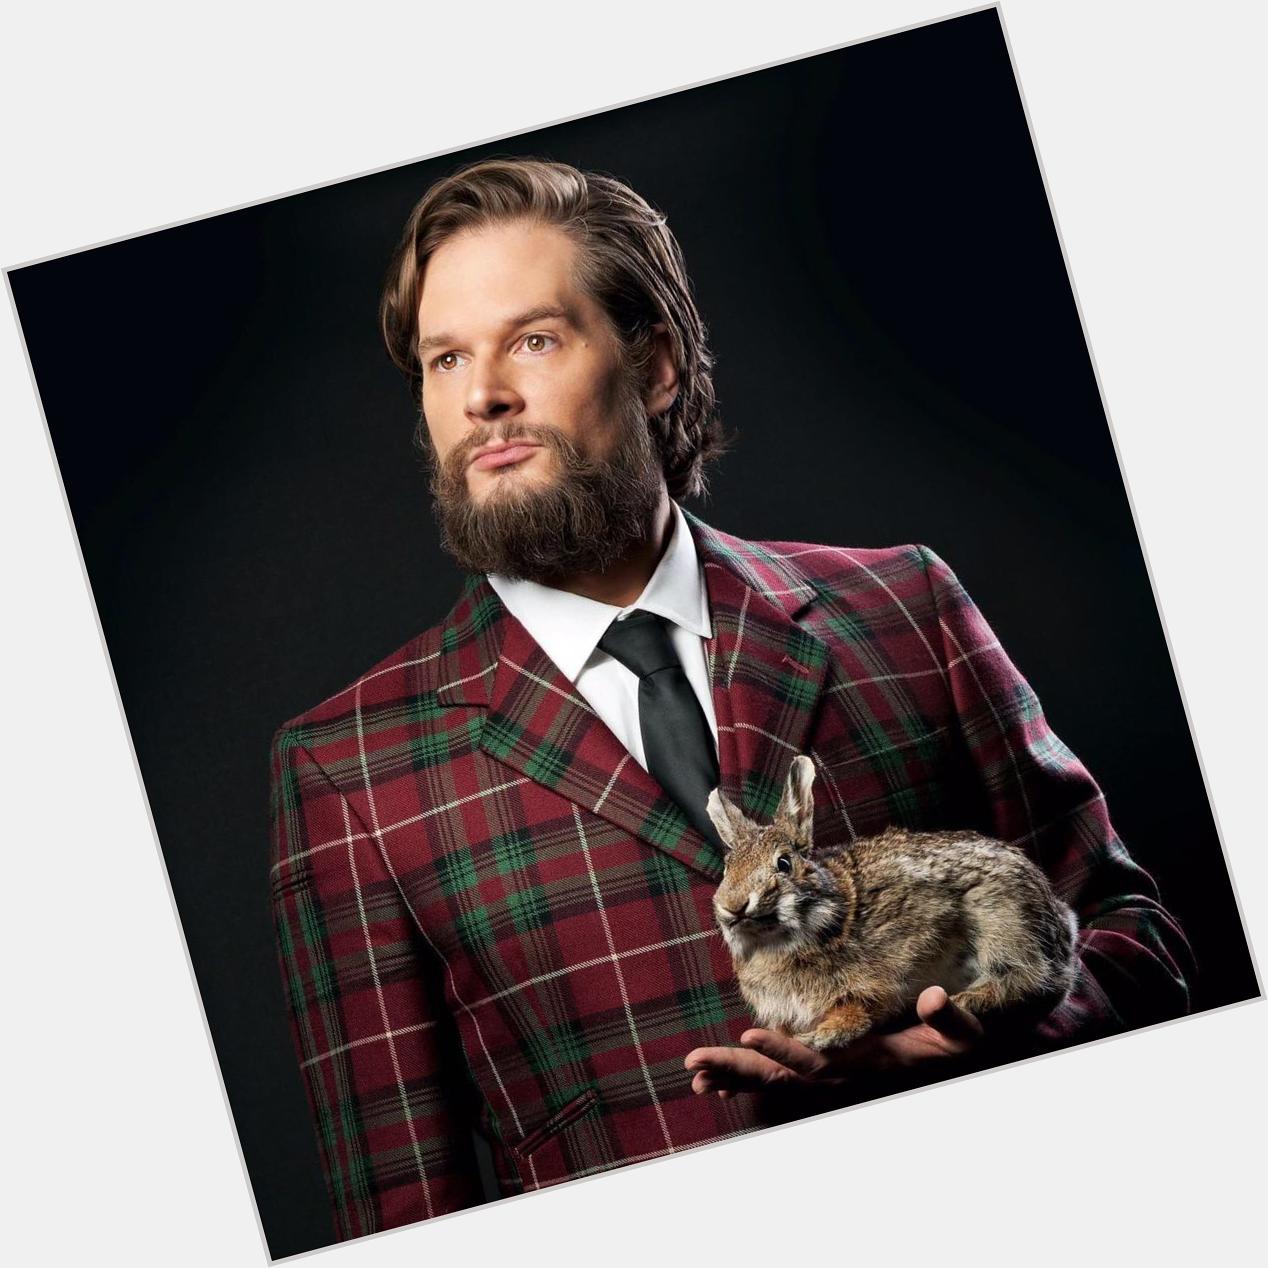 A very happy birthday to Bryan Fuller! I hope all your dreams come true! Thank-you for your creativity! 